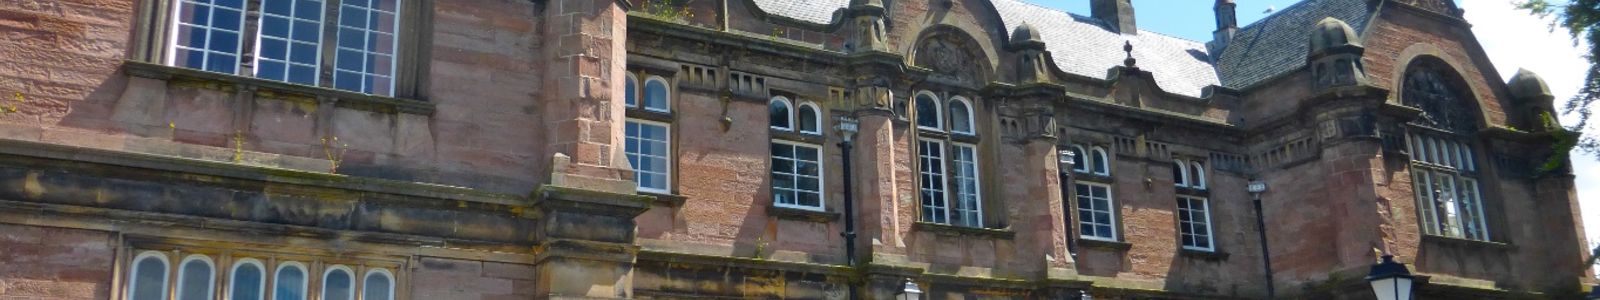 Work to start on transformation of historic Inverness buildings